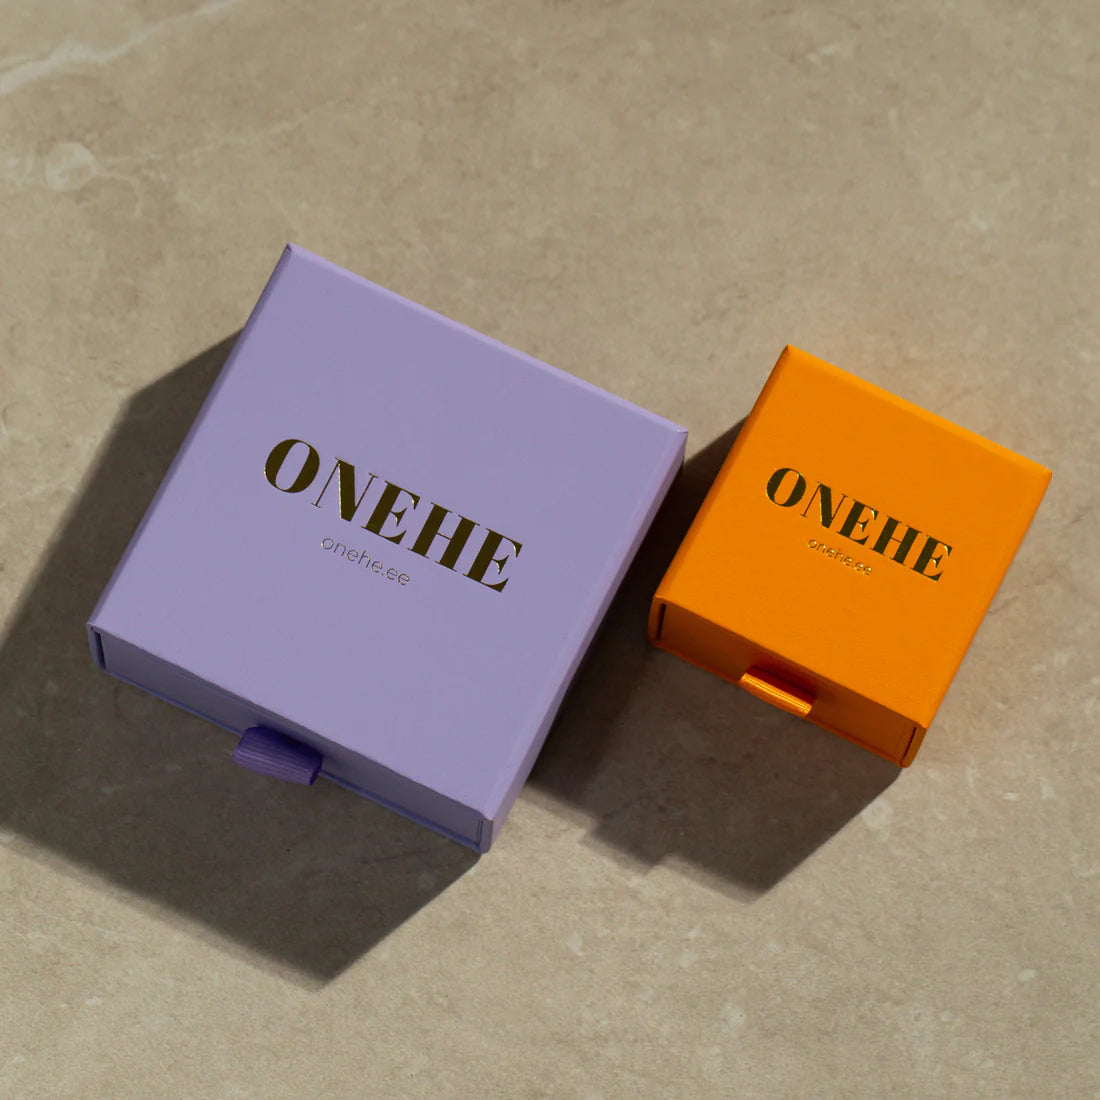 Resizable Ring MIST - Silver displayed on two boxes: purple with yellow object, orange with text. Hypoallergenic 925 sterling silver ring, rhodium plated, minimalist design, adjustable size.